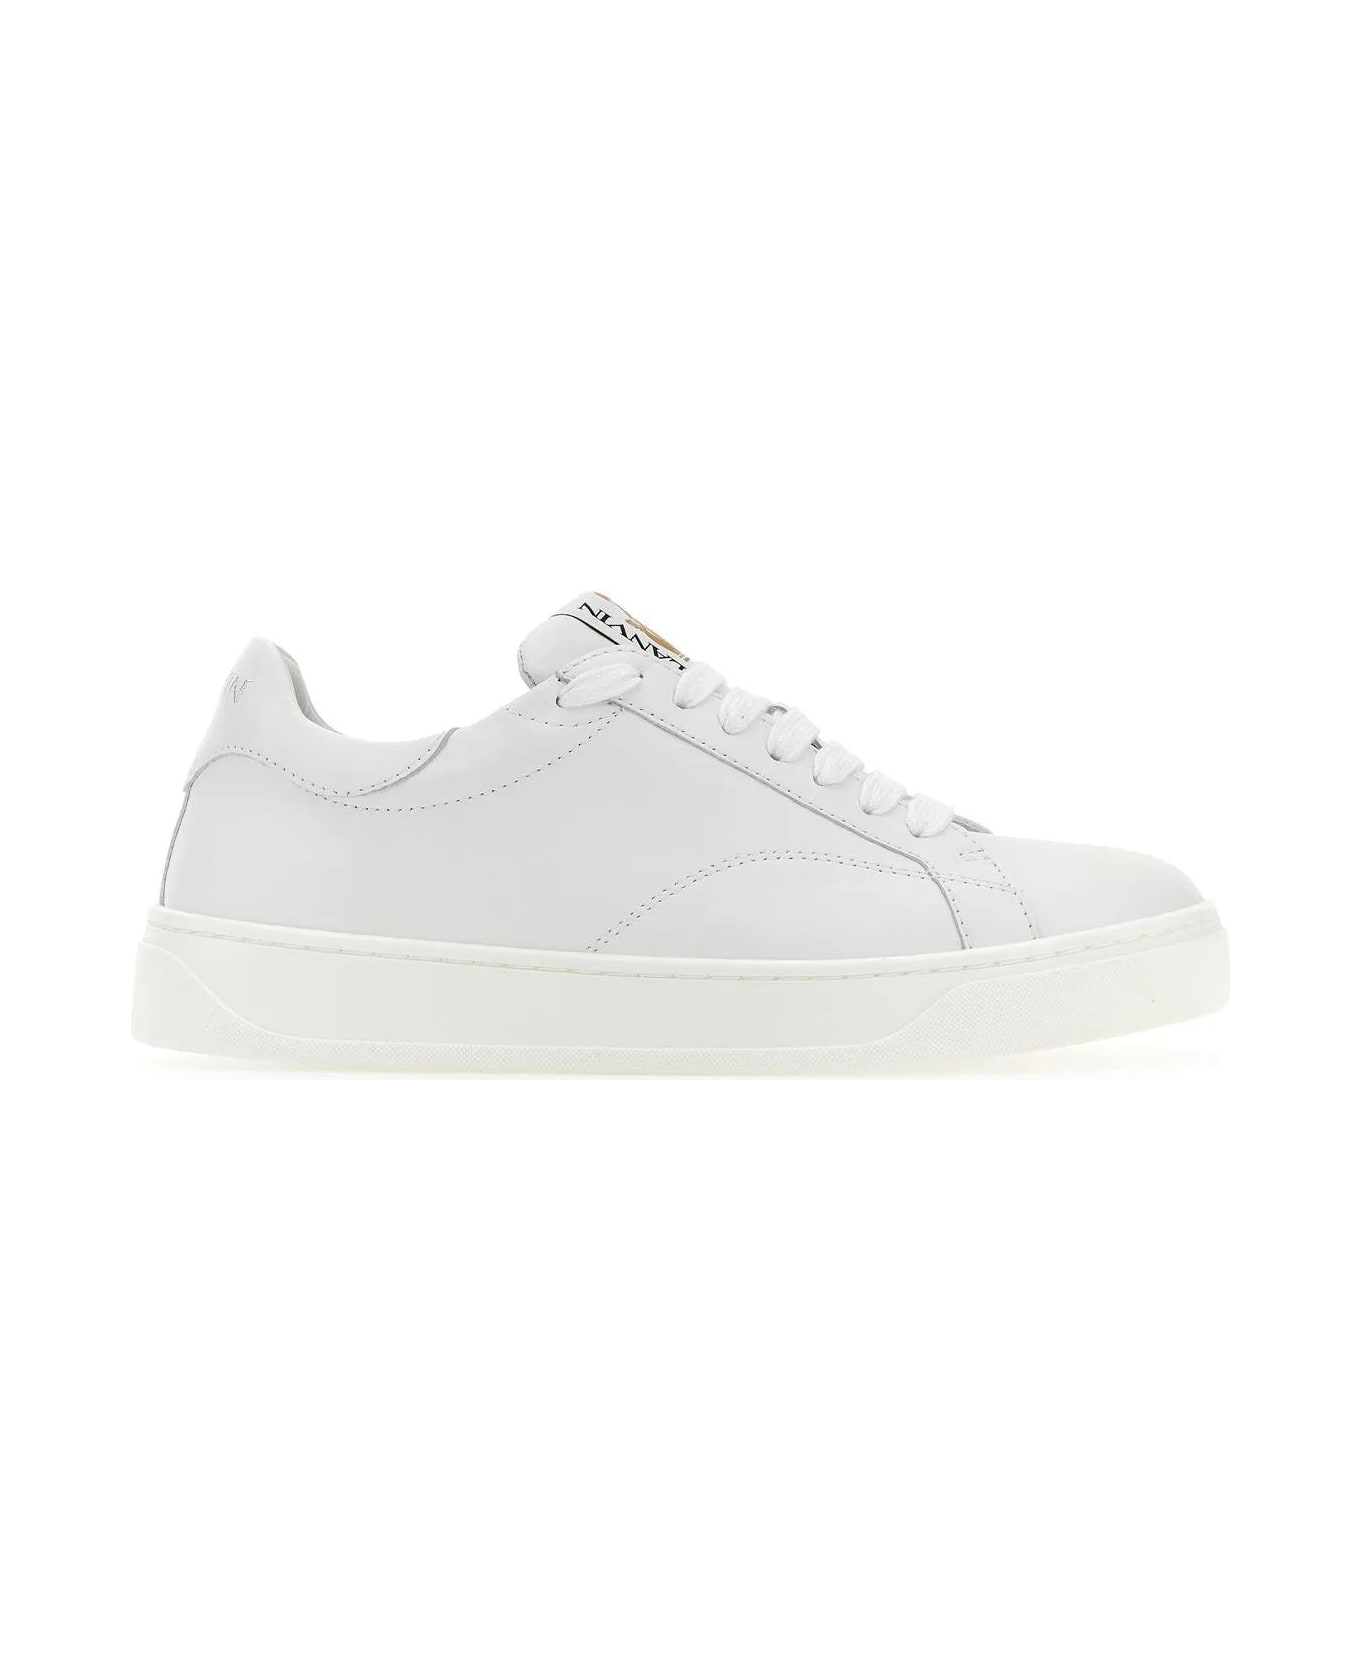 Lanvin White Leather Ddbo Sneakers - White